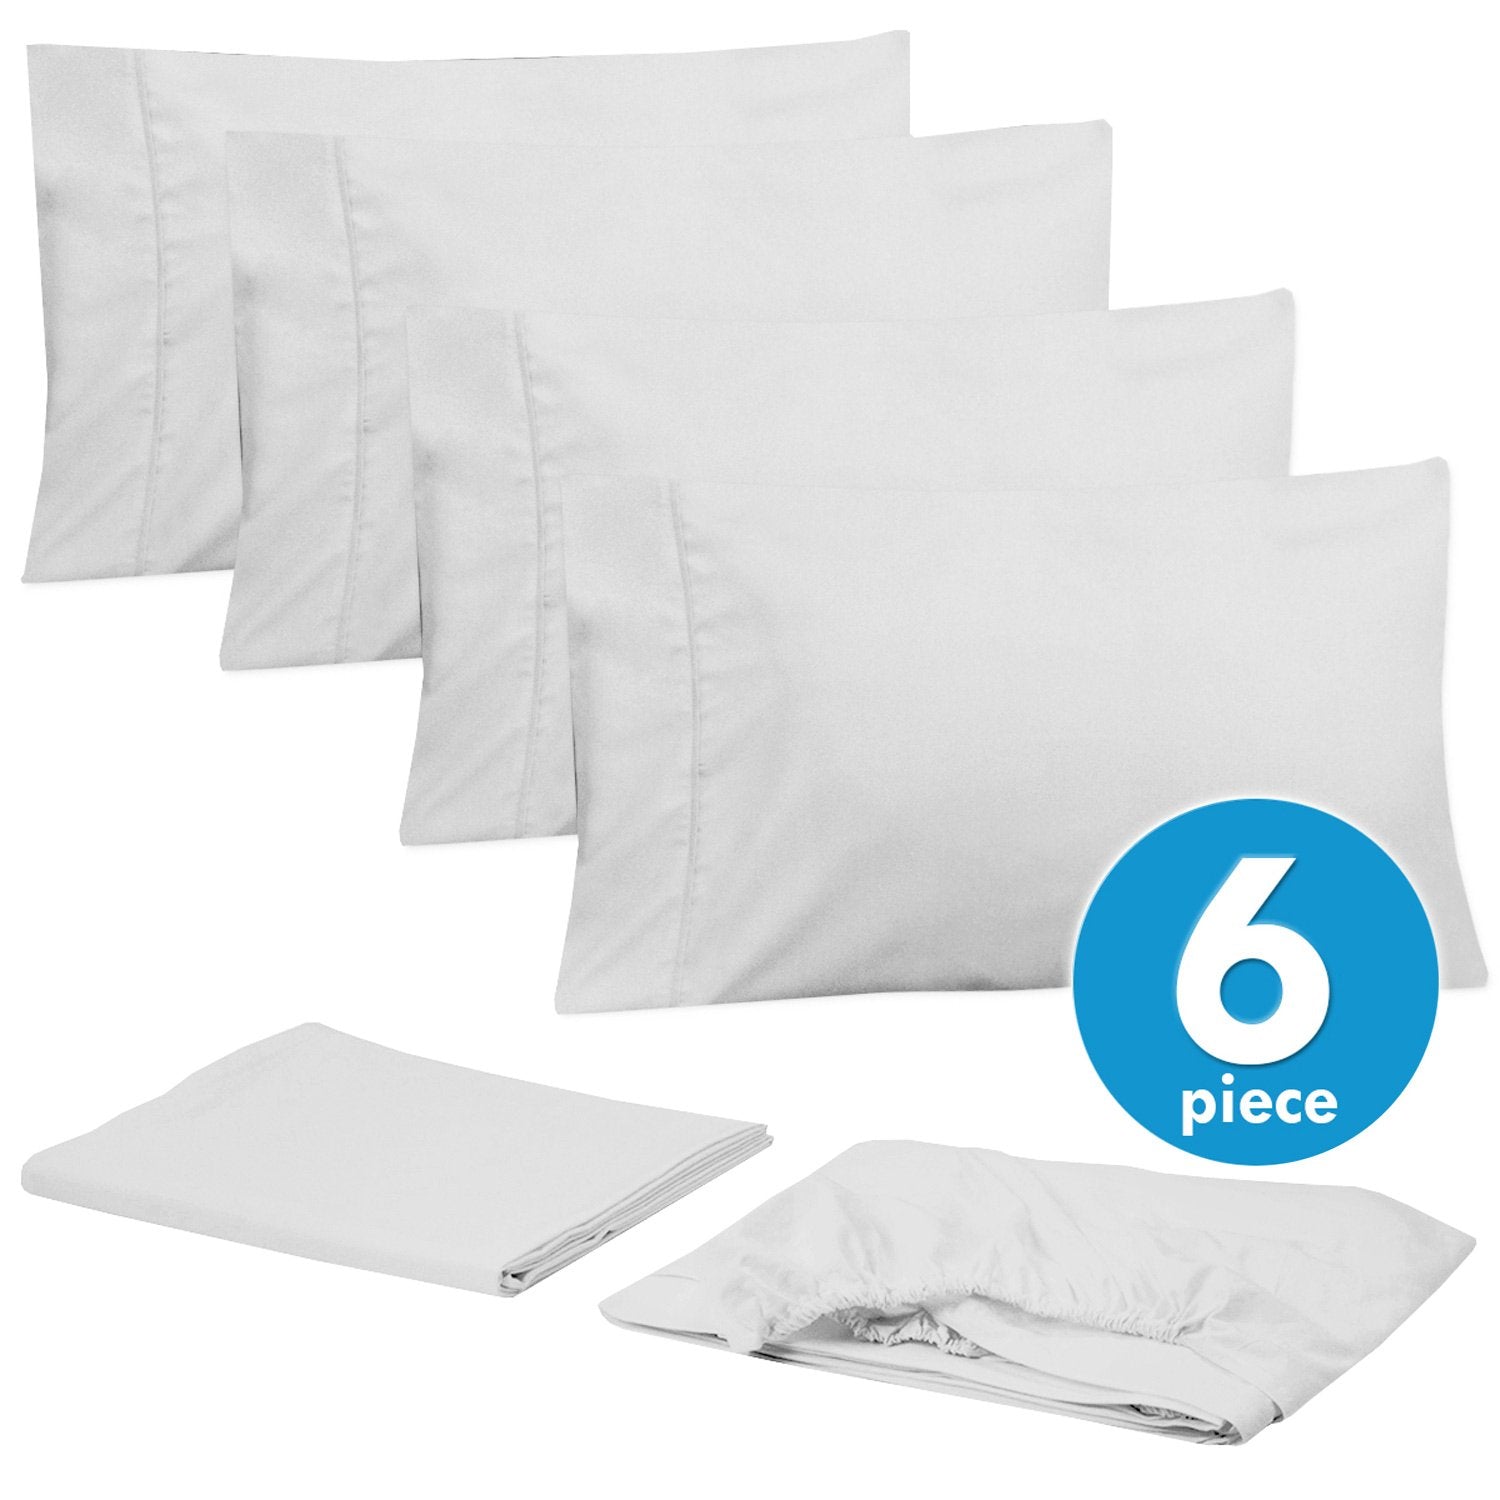 Deluxe 6-Piece Bed Sheet Set (White) - Set